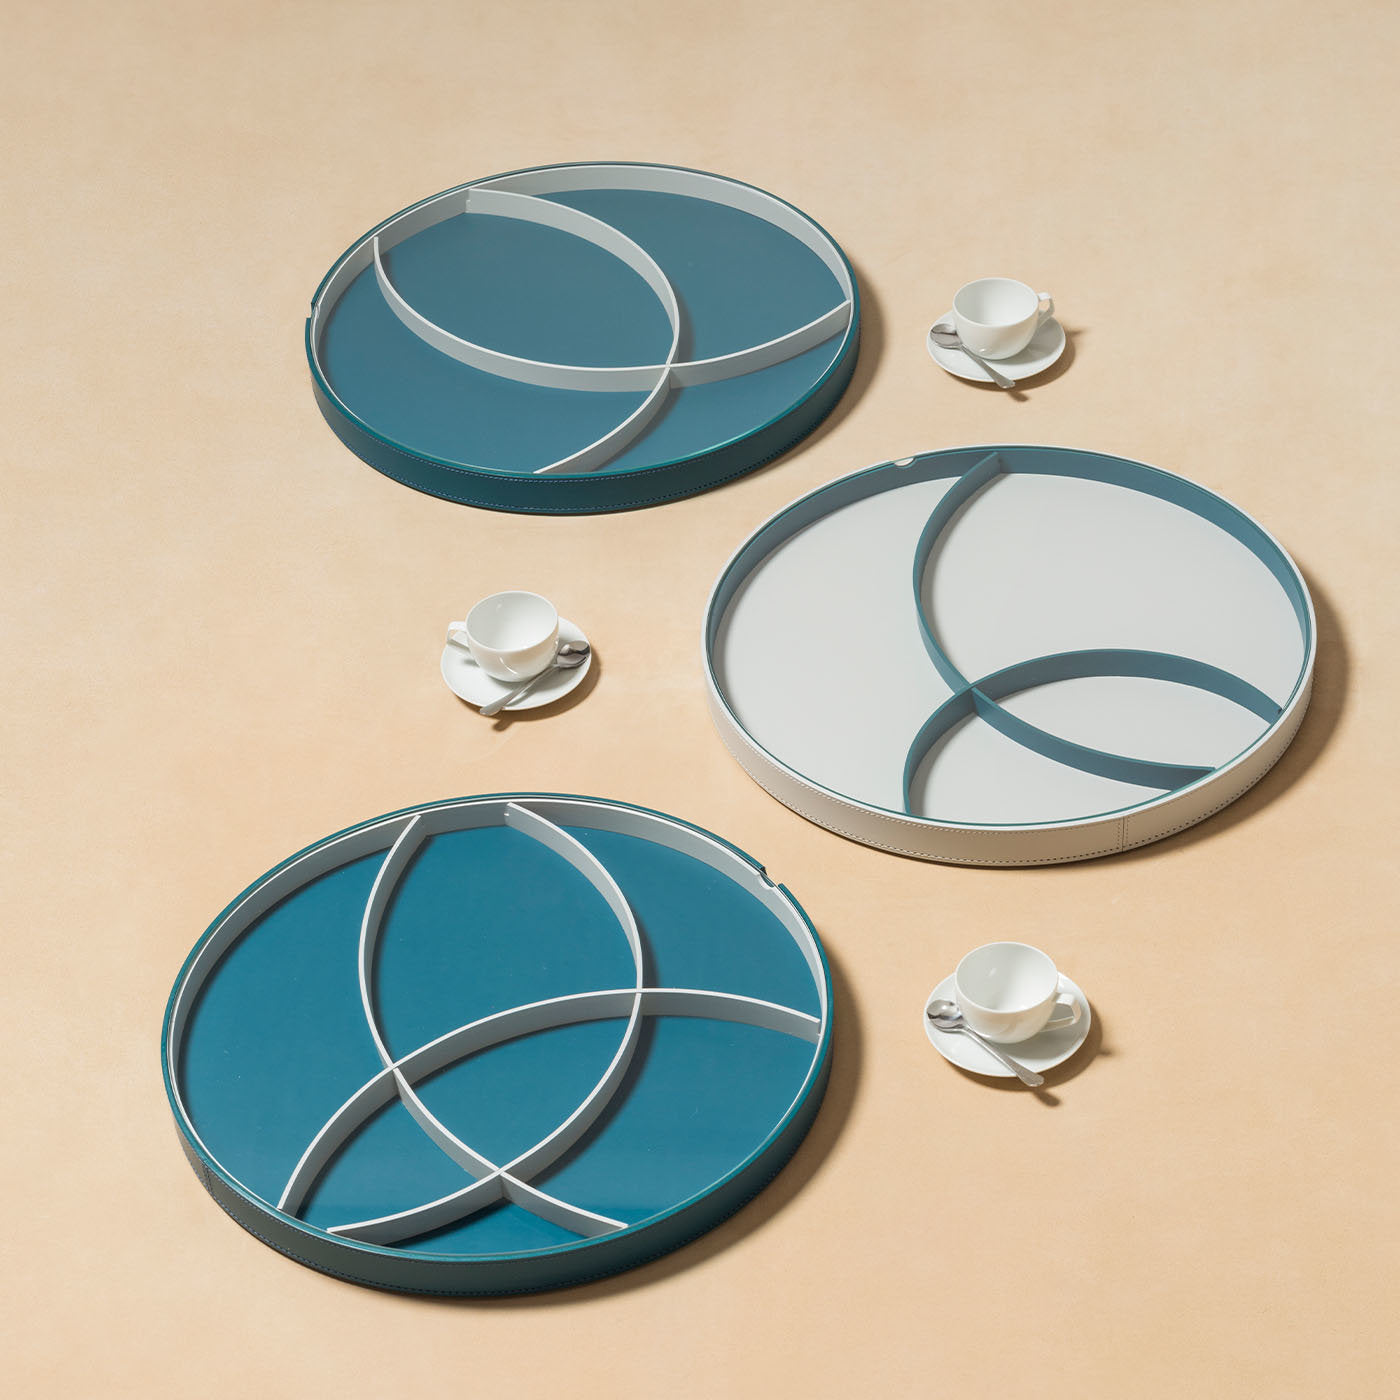 Orbit Petrol Blue Round Tray N. 2 with Dividers - Alternative view 2